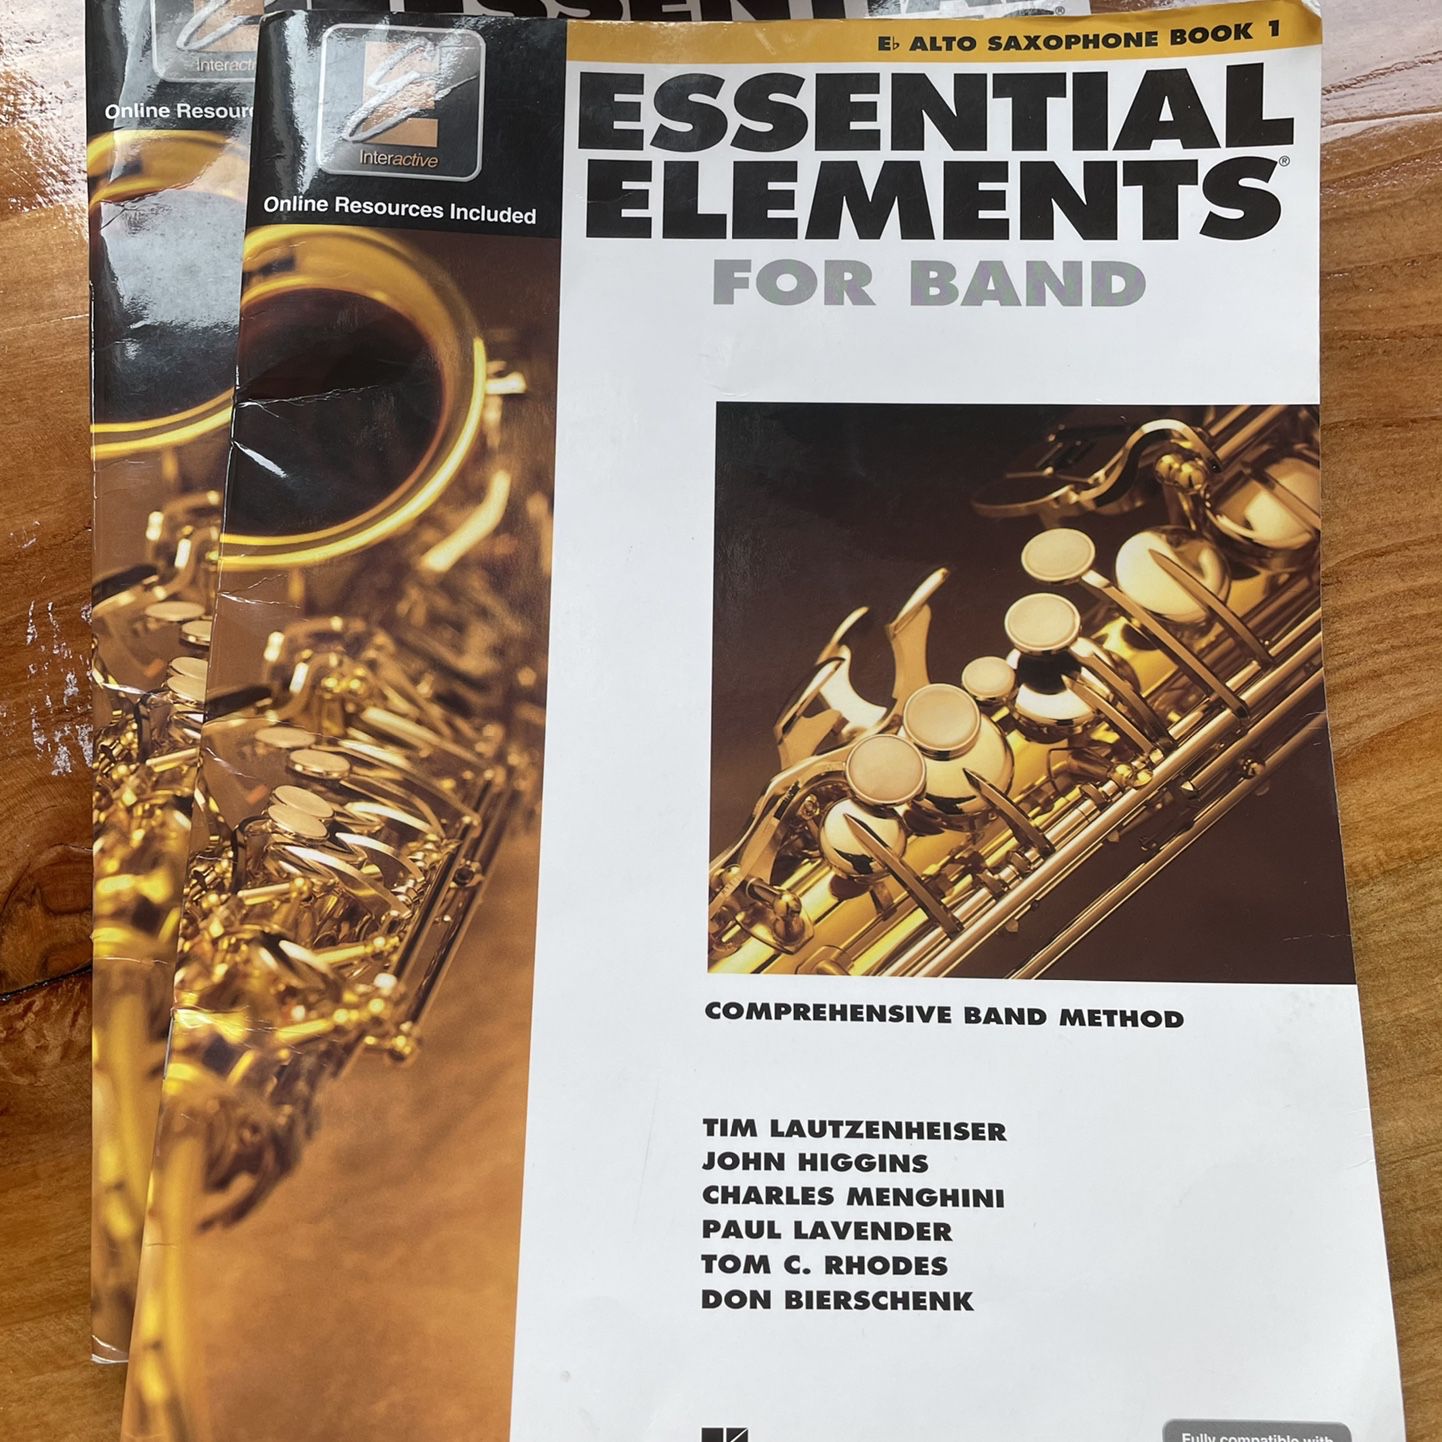 Alto Saxophone Book 1 - Essential Elements for band